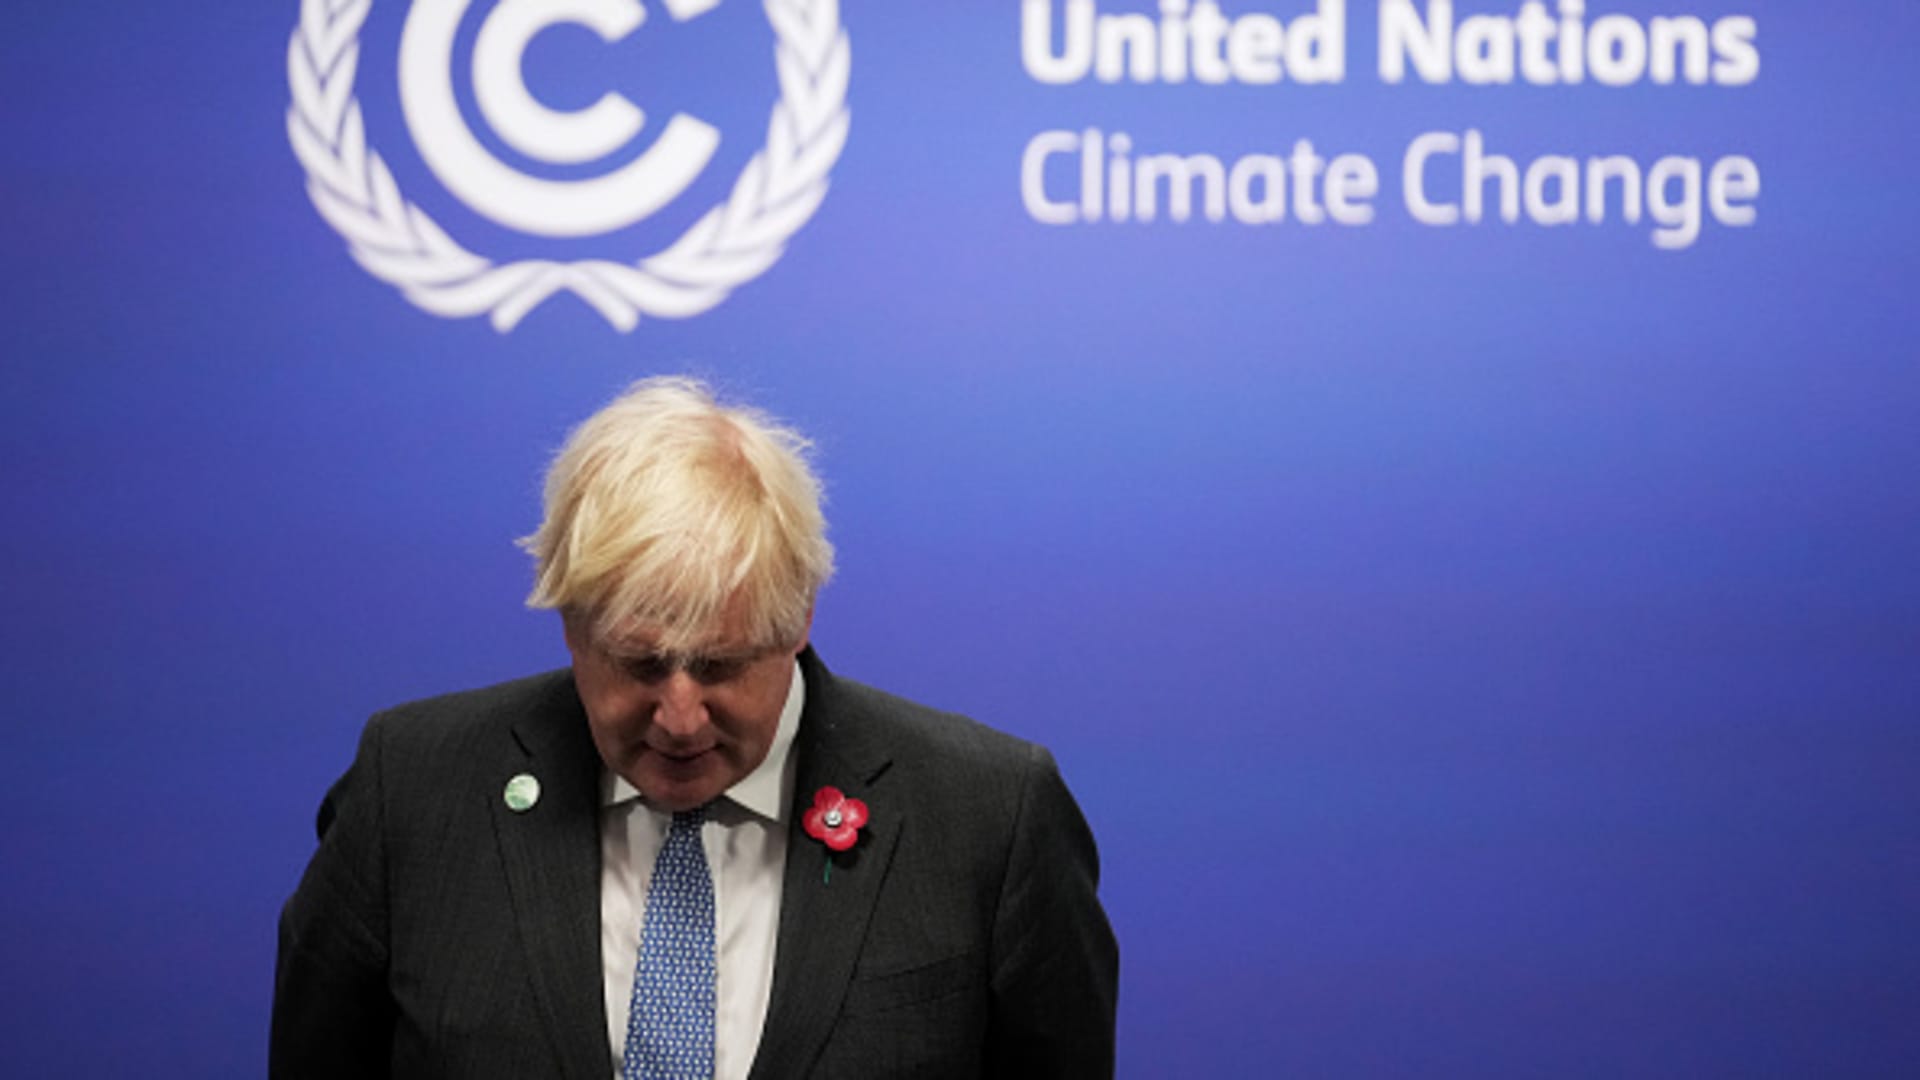 British Prime Minister Boris Johnson waits to receive attendees during day two of COP26 at SECC on November 1, 2021 in Glasgow, Scotland. 2021 sees the 26th United Nations Climate Change Conference.